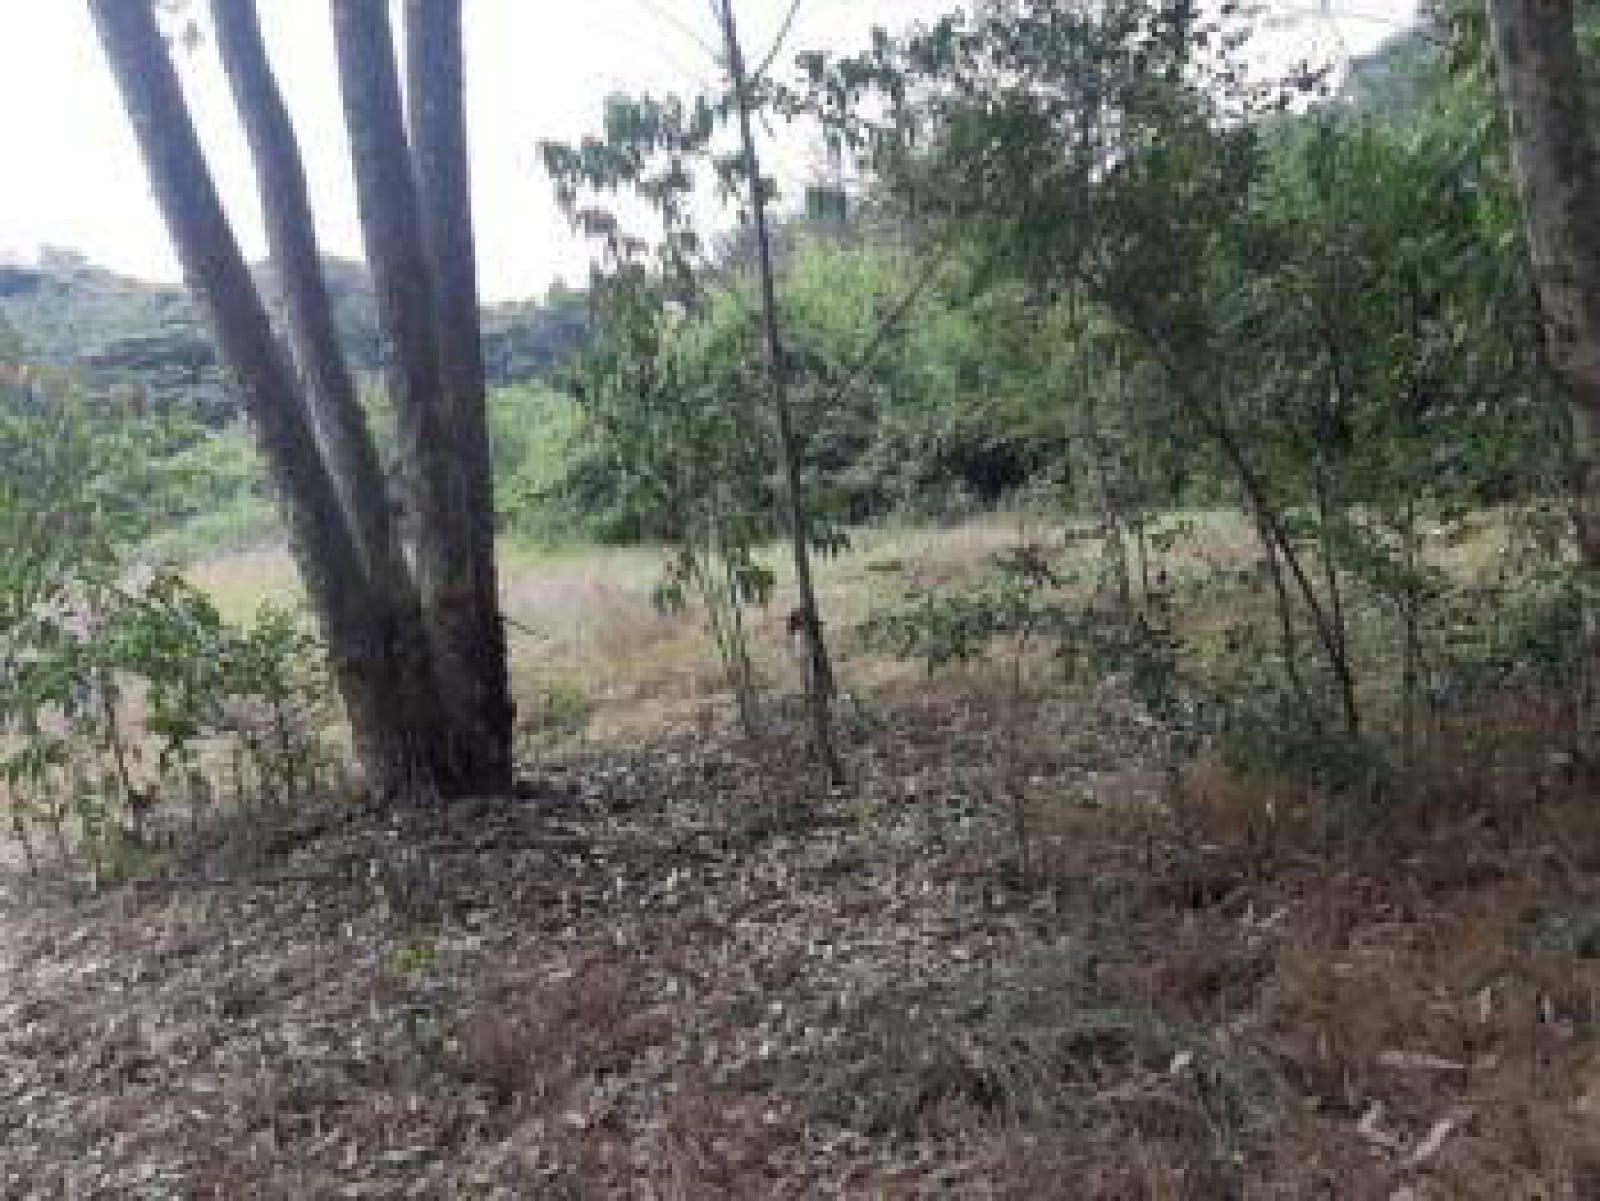 Land for sale in Karen KCB 5 Acres Ready Title Deed QUICK SALE Exclusive